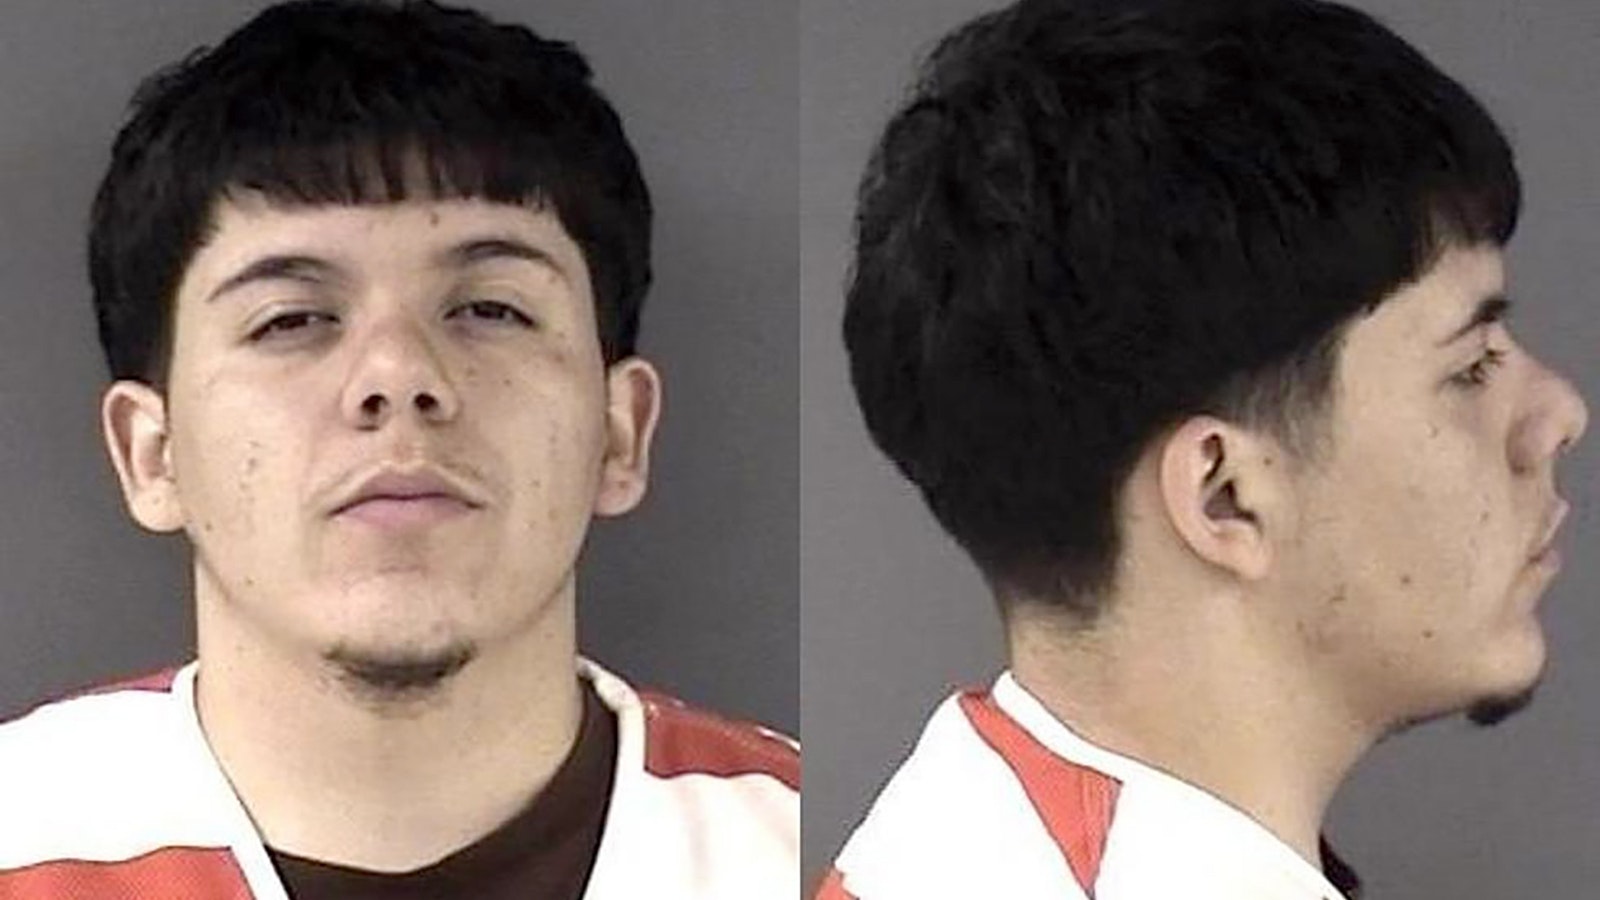 Joey Carabajal Jr., 18, told police the bullet that killed his 15-year-old cousin in an early morning drive-by shooting Aug. 30 was meant for him.